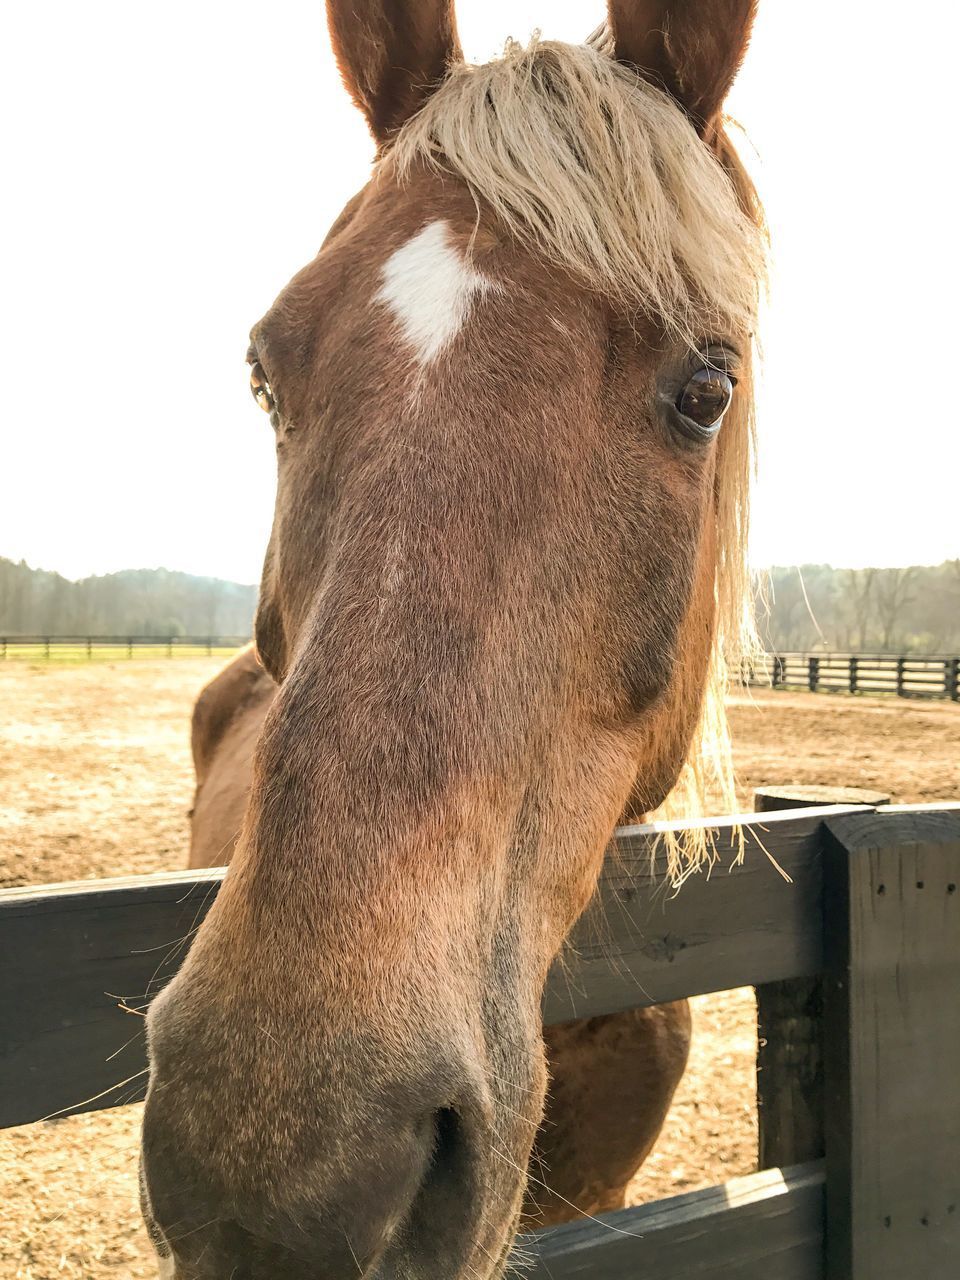 CLOSE-UP OF HORSE IN ZOO